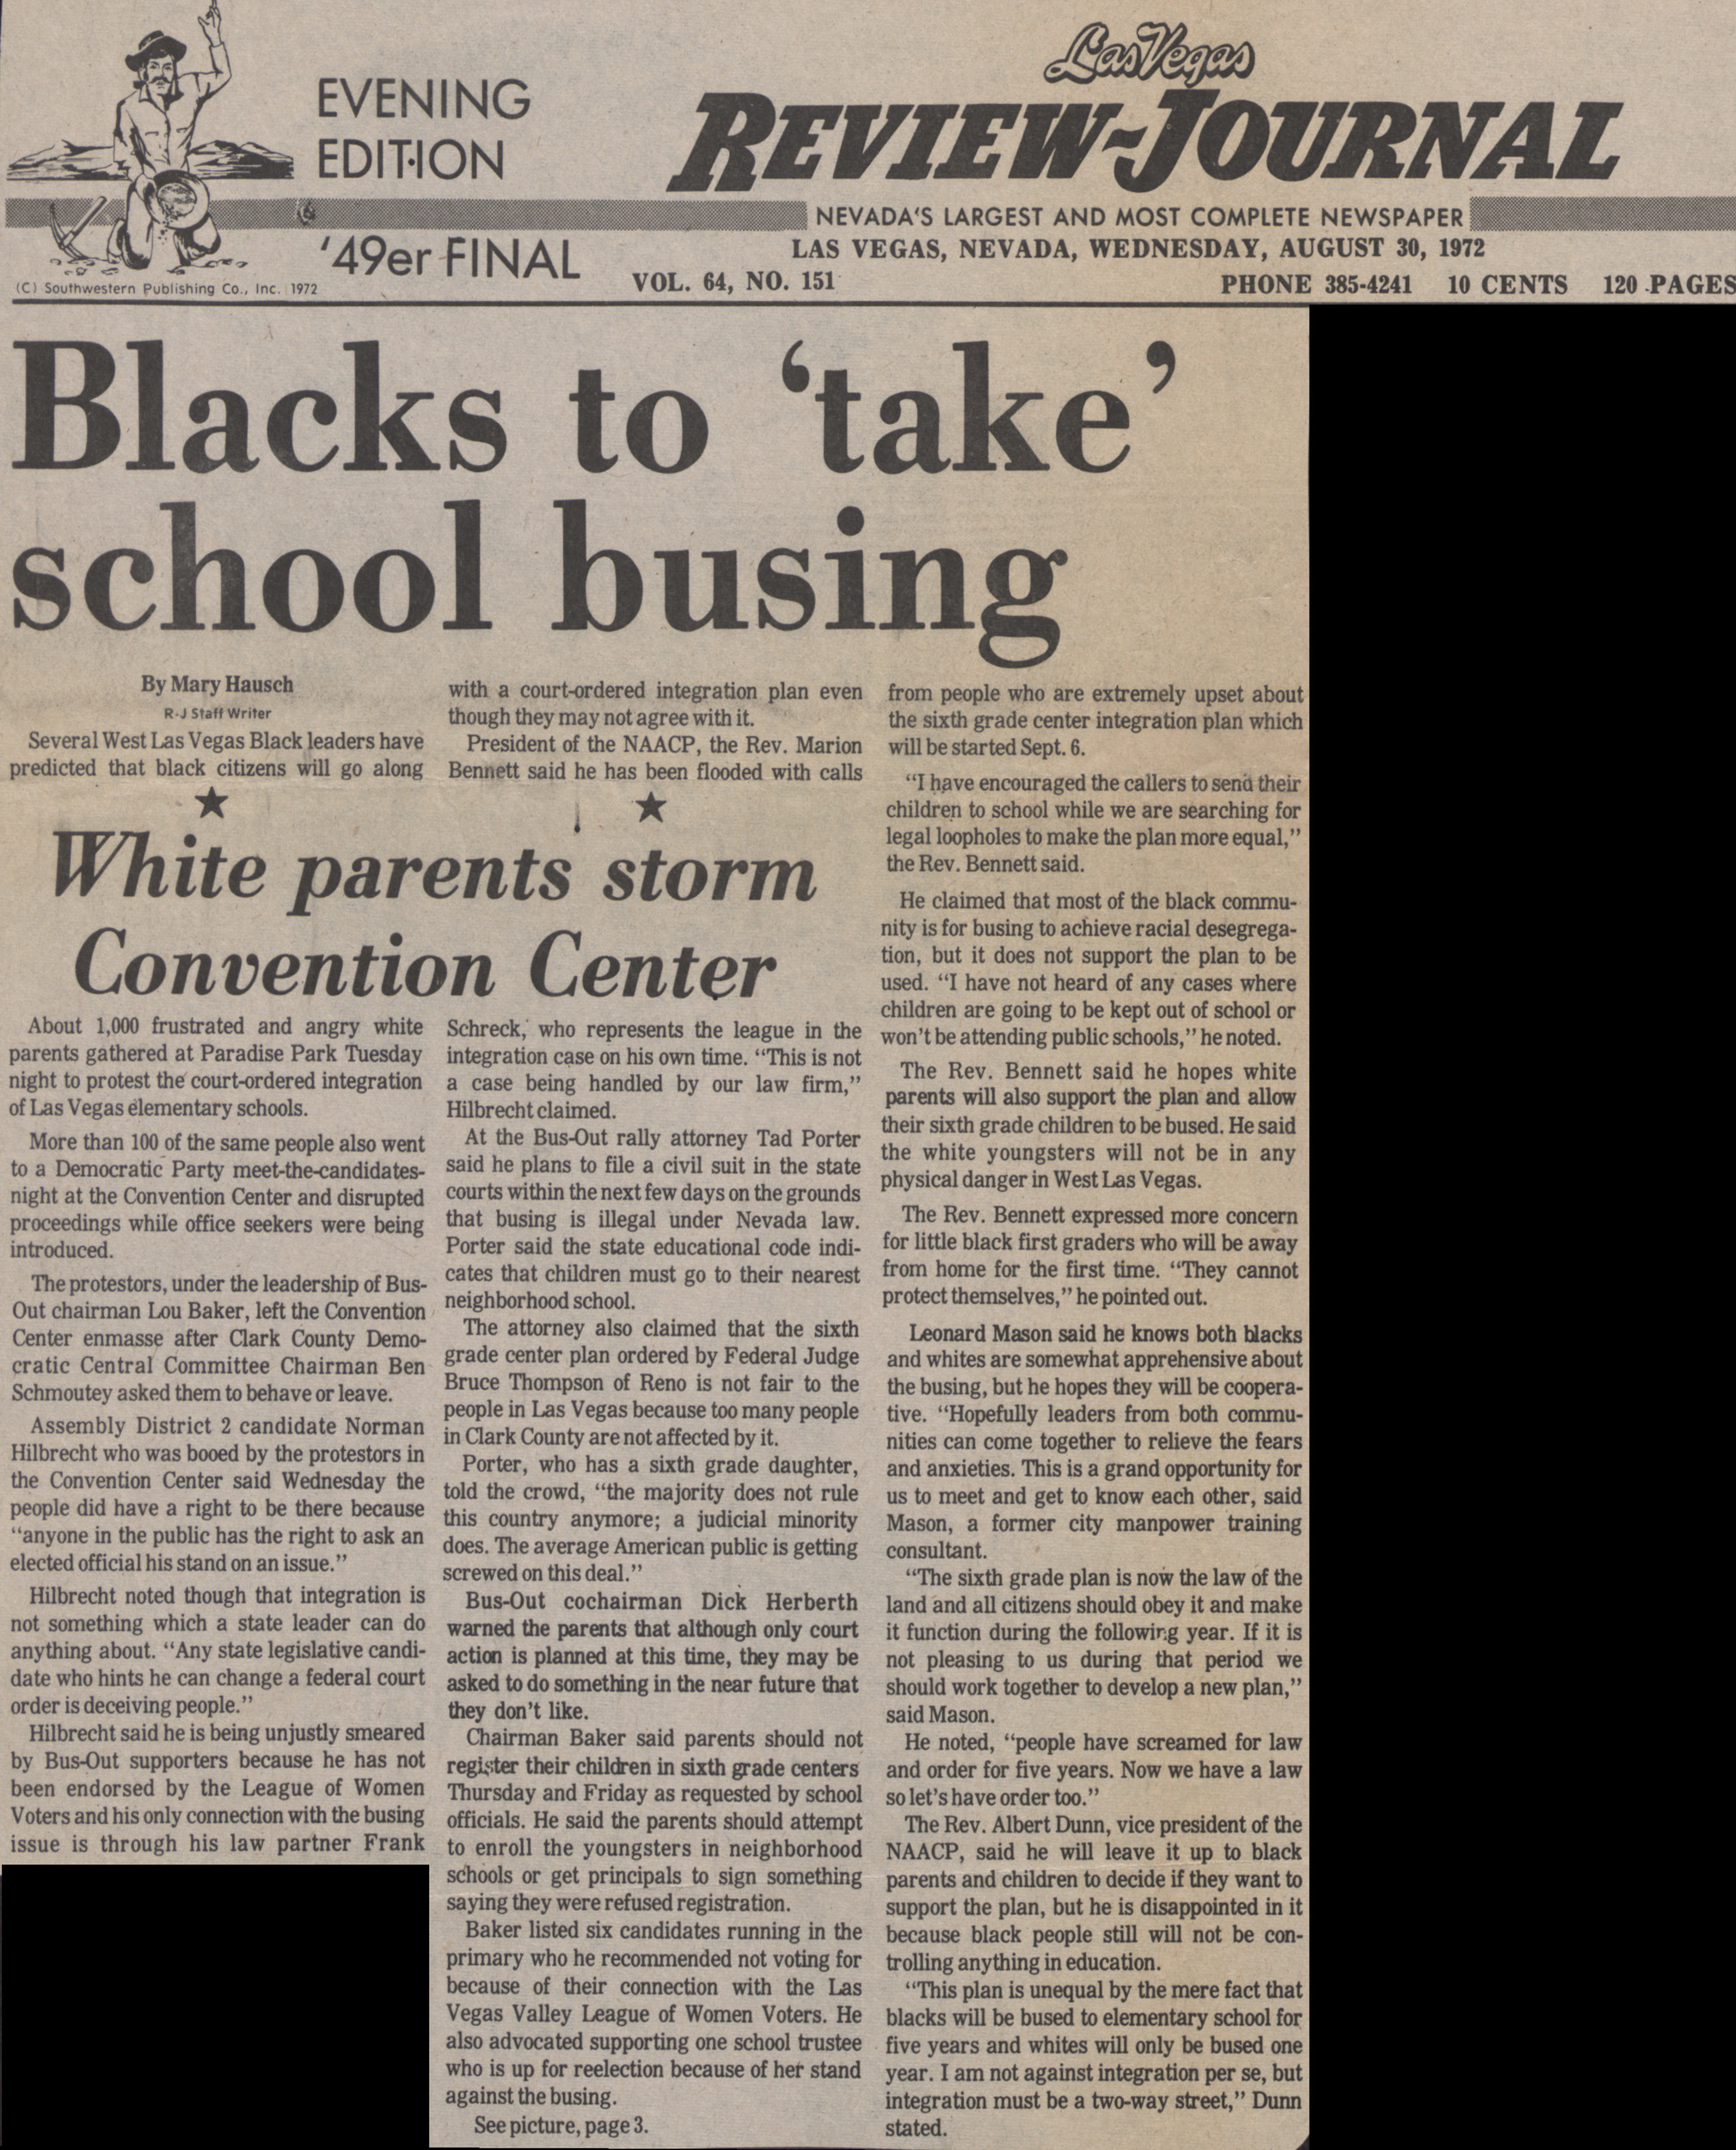 Newspaper clipping, Blacks to 'take' school busing, White parents storm Convention Center, Las Vegas Review-Journal, August 30, 1972